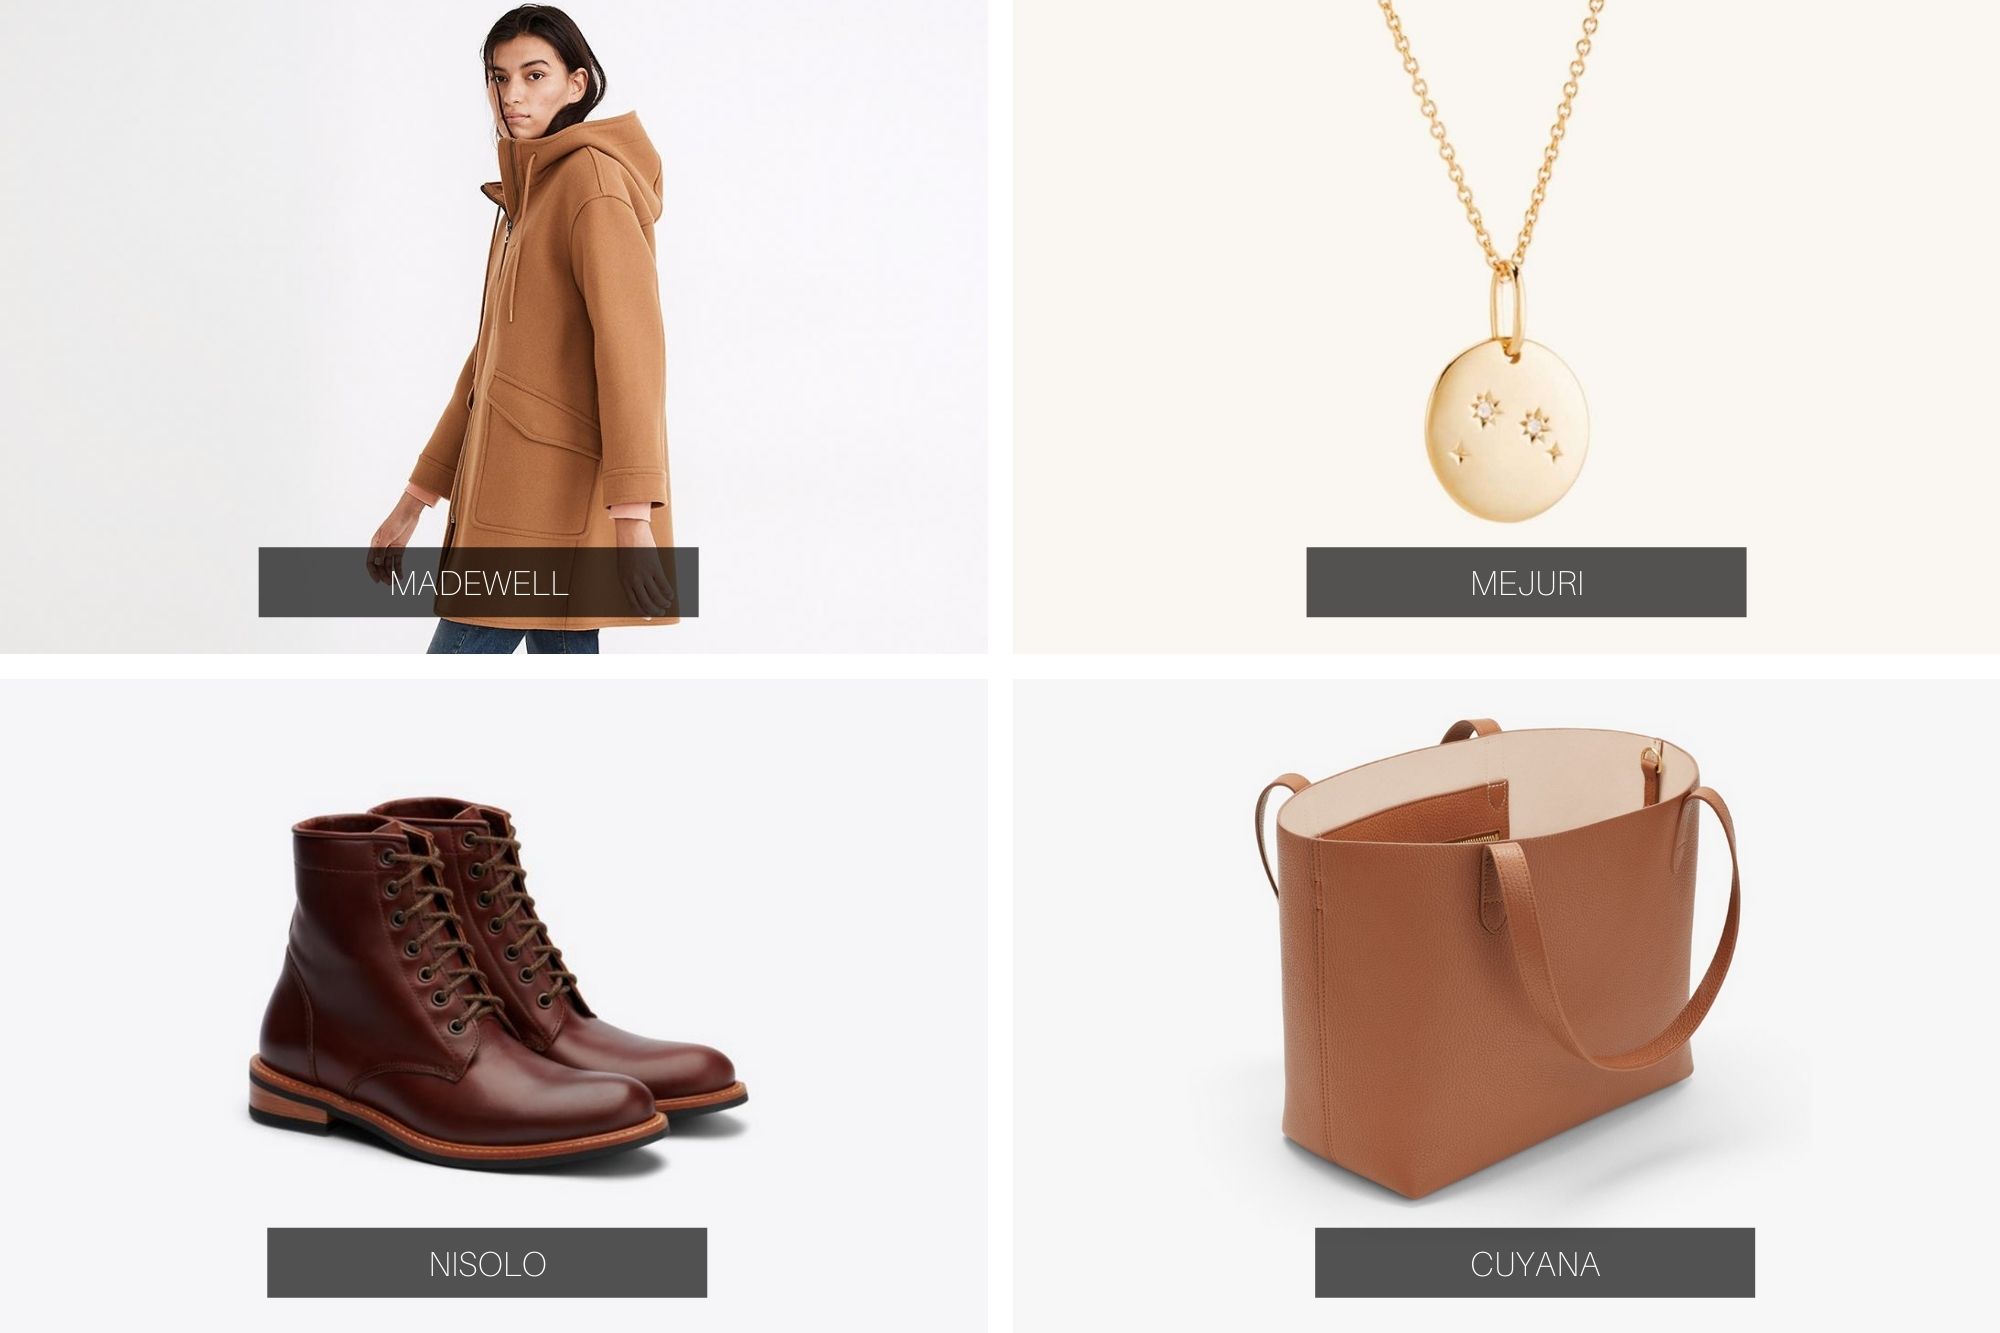 Collage of a camel coat, a gold pendant necklace, a pair of brown boots, and a camel tote